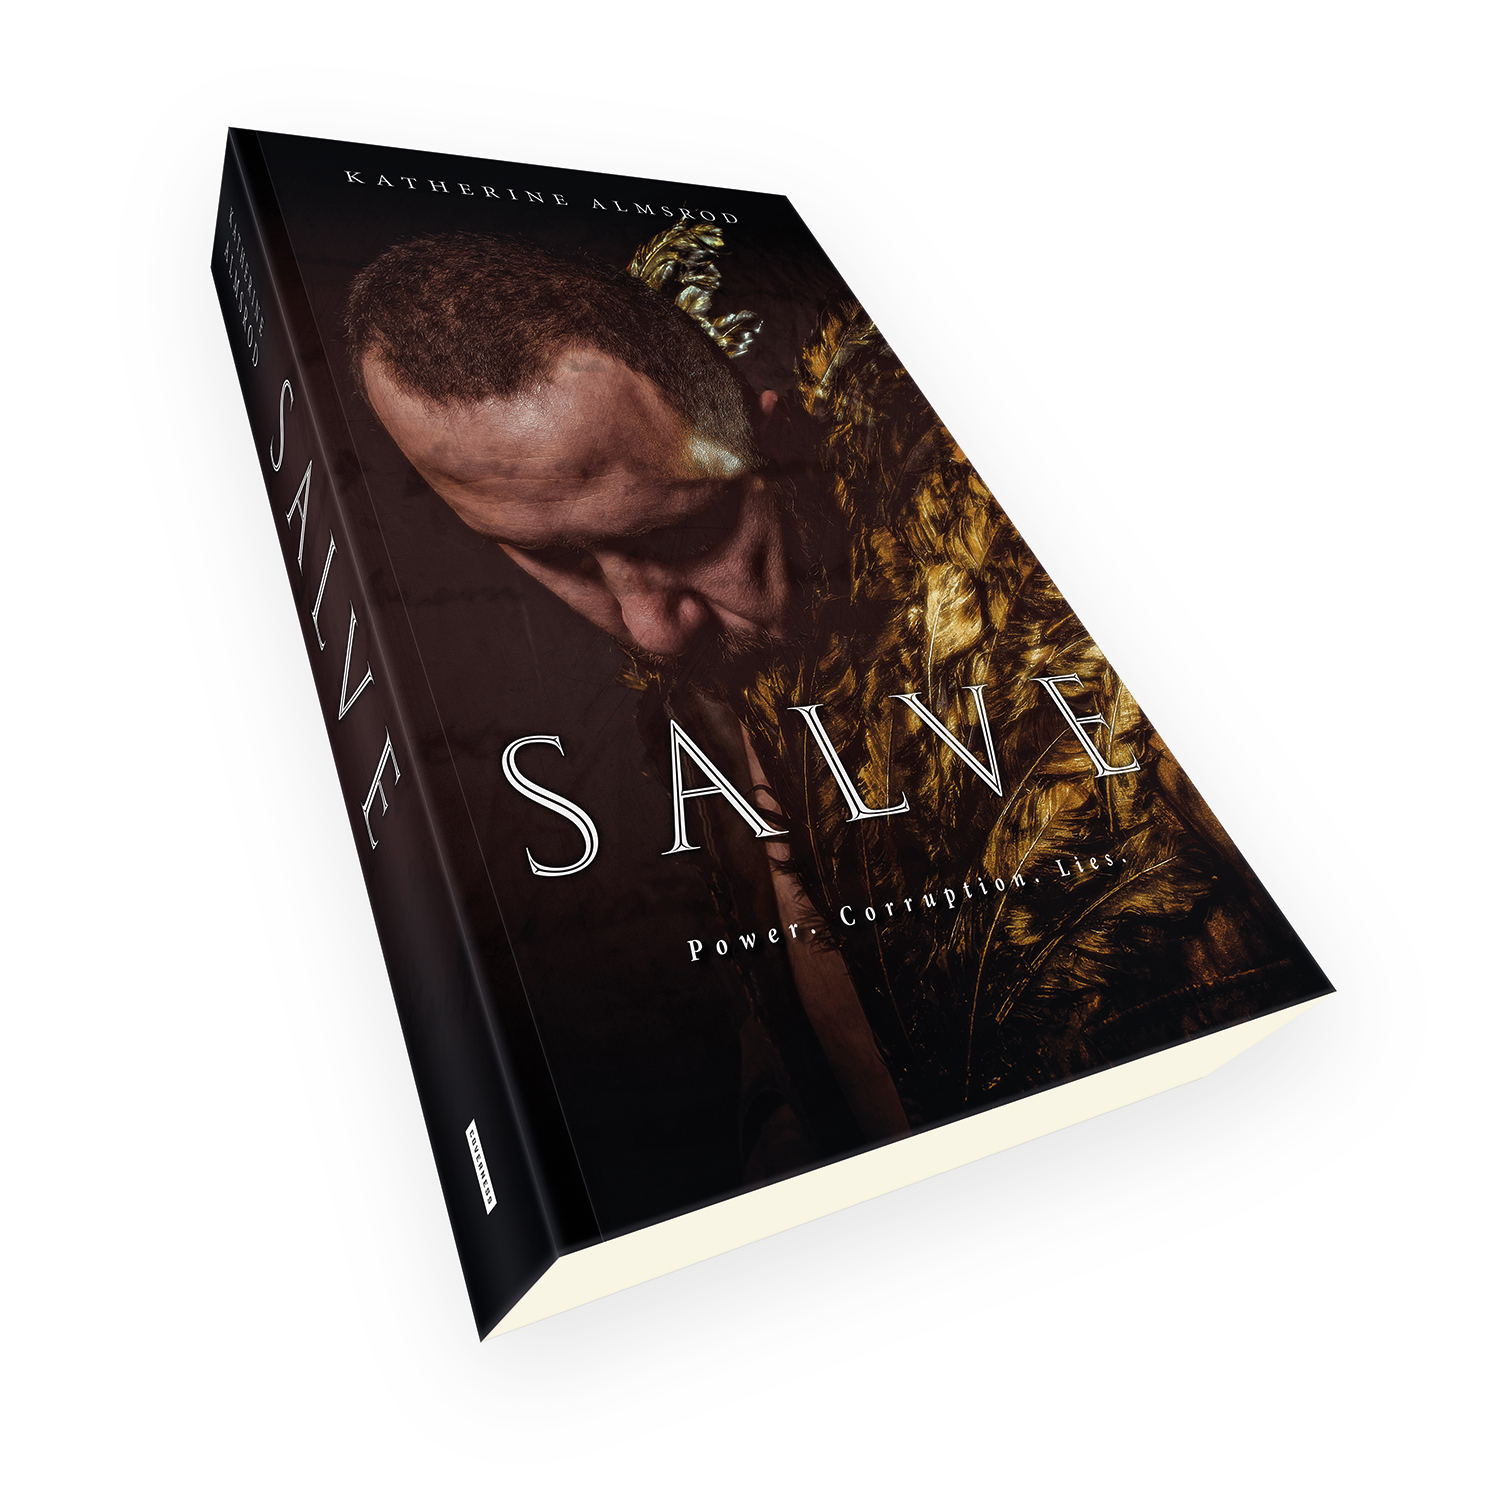 'Salve' is a bespoke cover design for a historical novel. The book cover was designed by Mark Thomas, of coverness.com. To find out more about my book design services, please visit www.coverness.com.